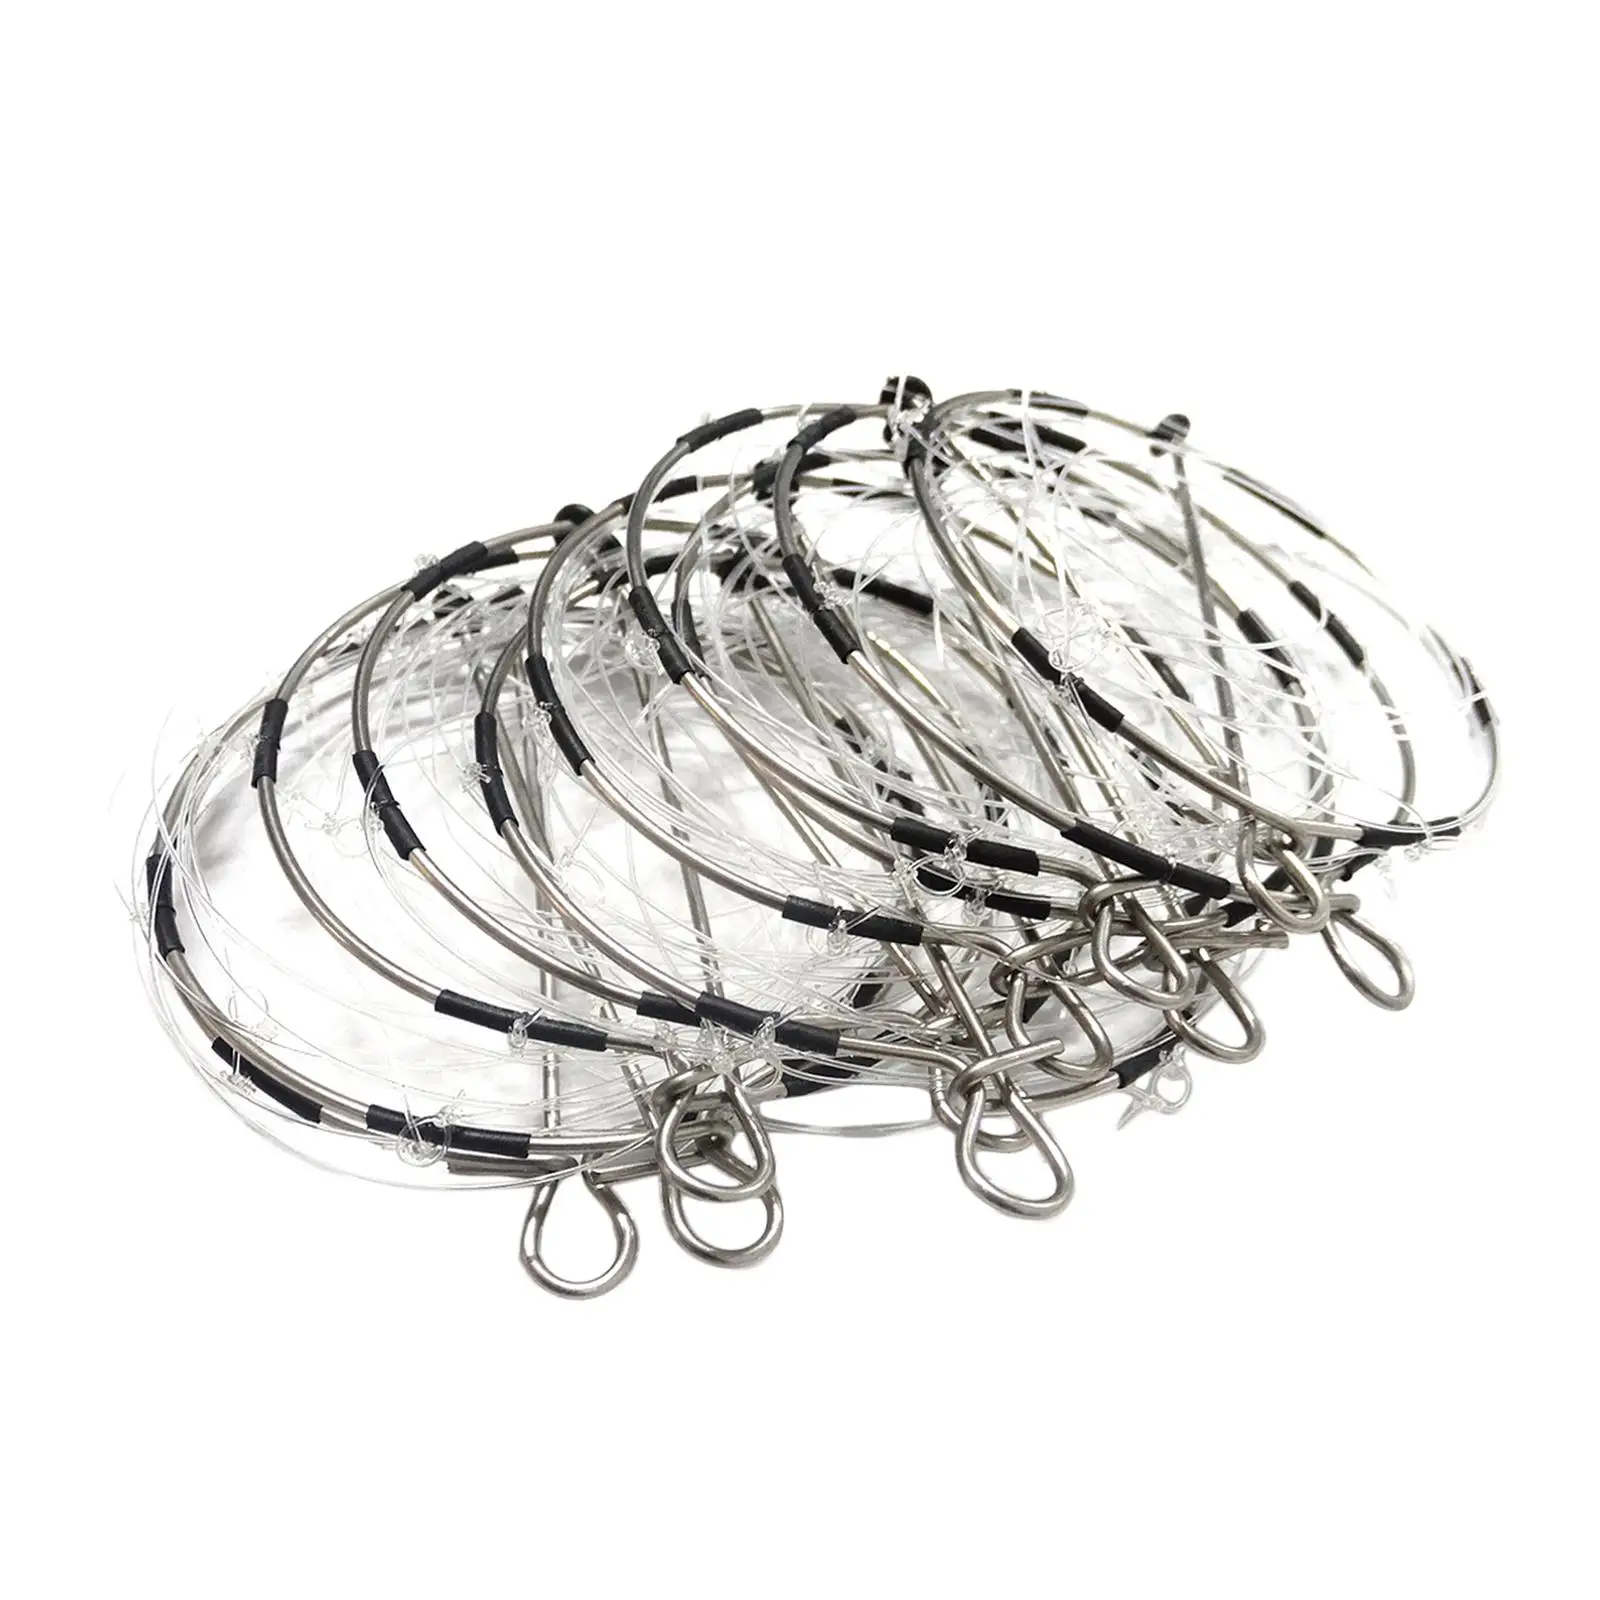 10Pcs Crab Trap 6-ring Repeated Use Cast Dip Cage Portable Steel Fishing Bait Trap for Crayfish Crab Crawdad Crawfish Reservoirs